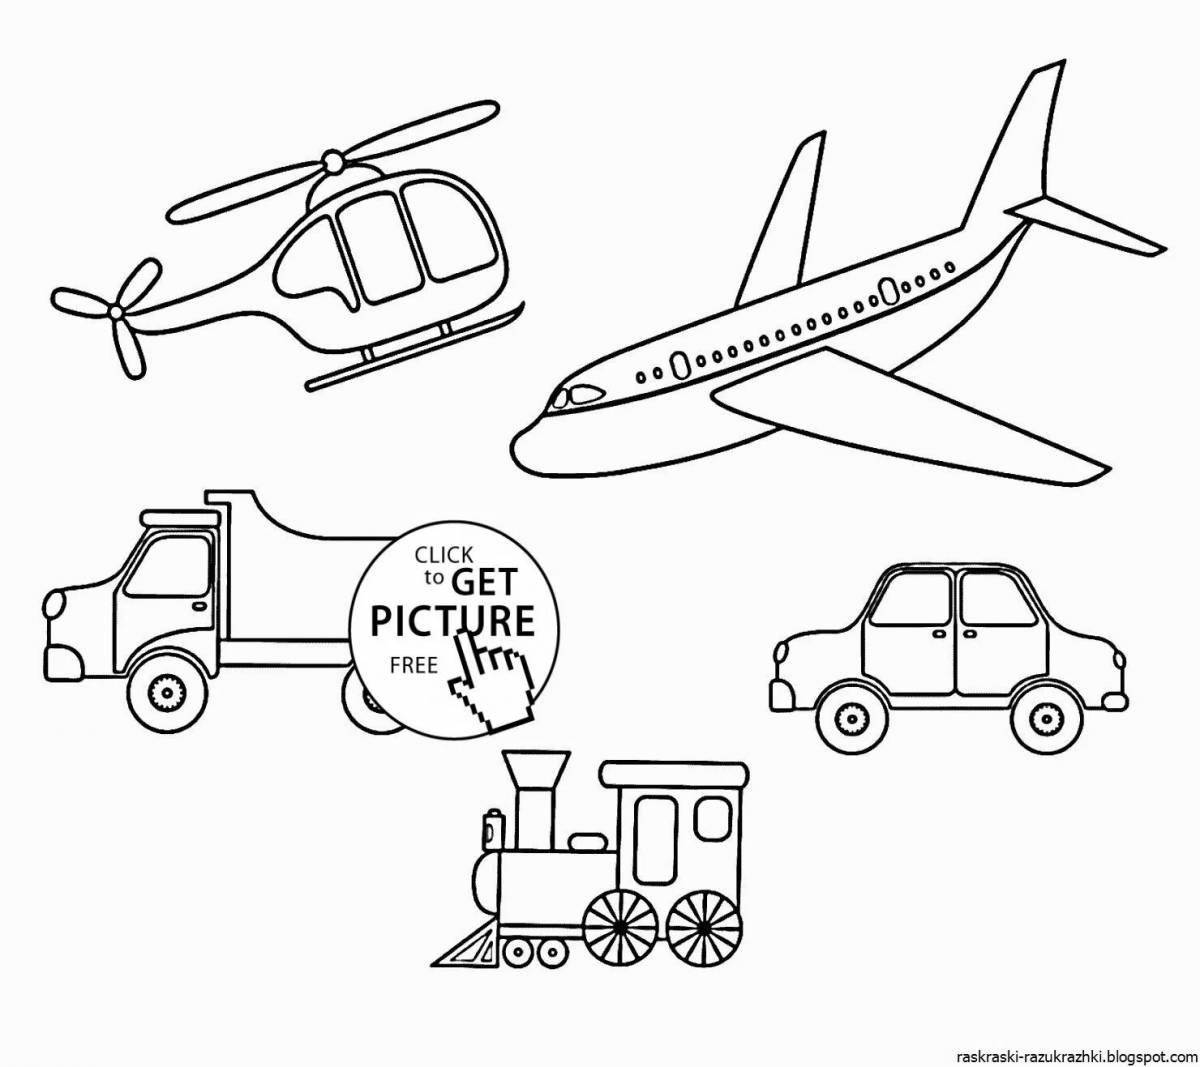 Great transport coloring book for beginners